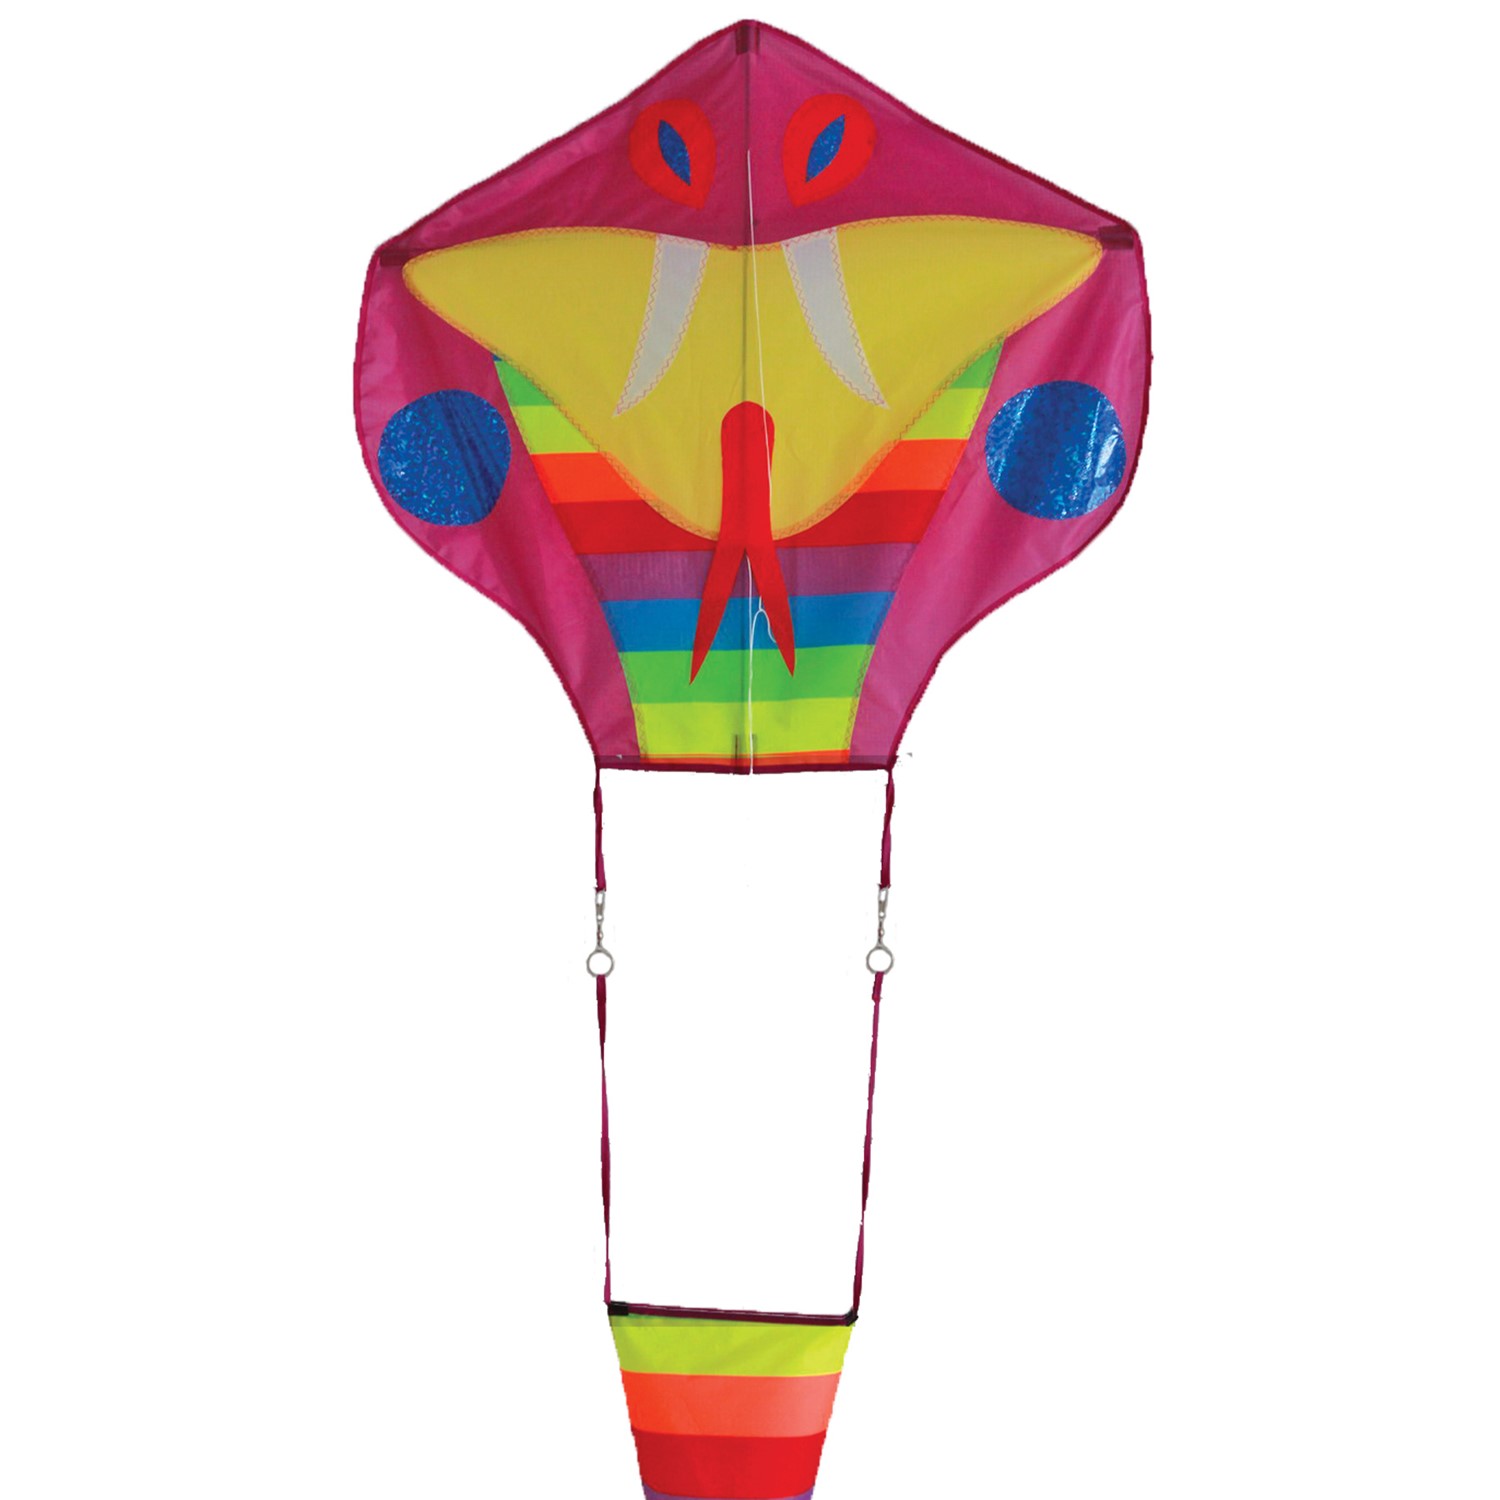 In the Breeze Serpent Kite 3020